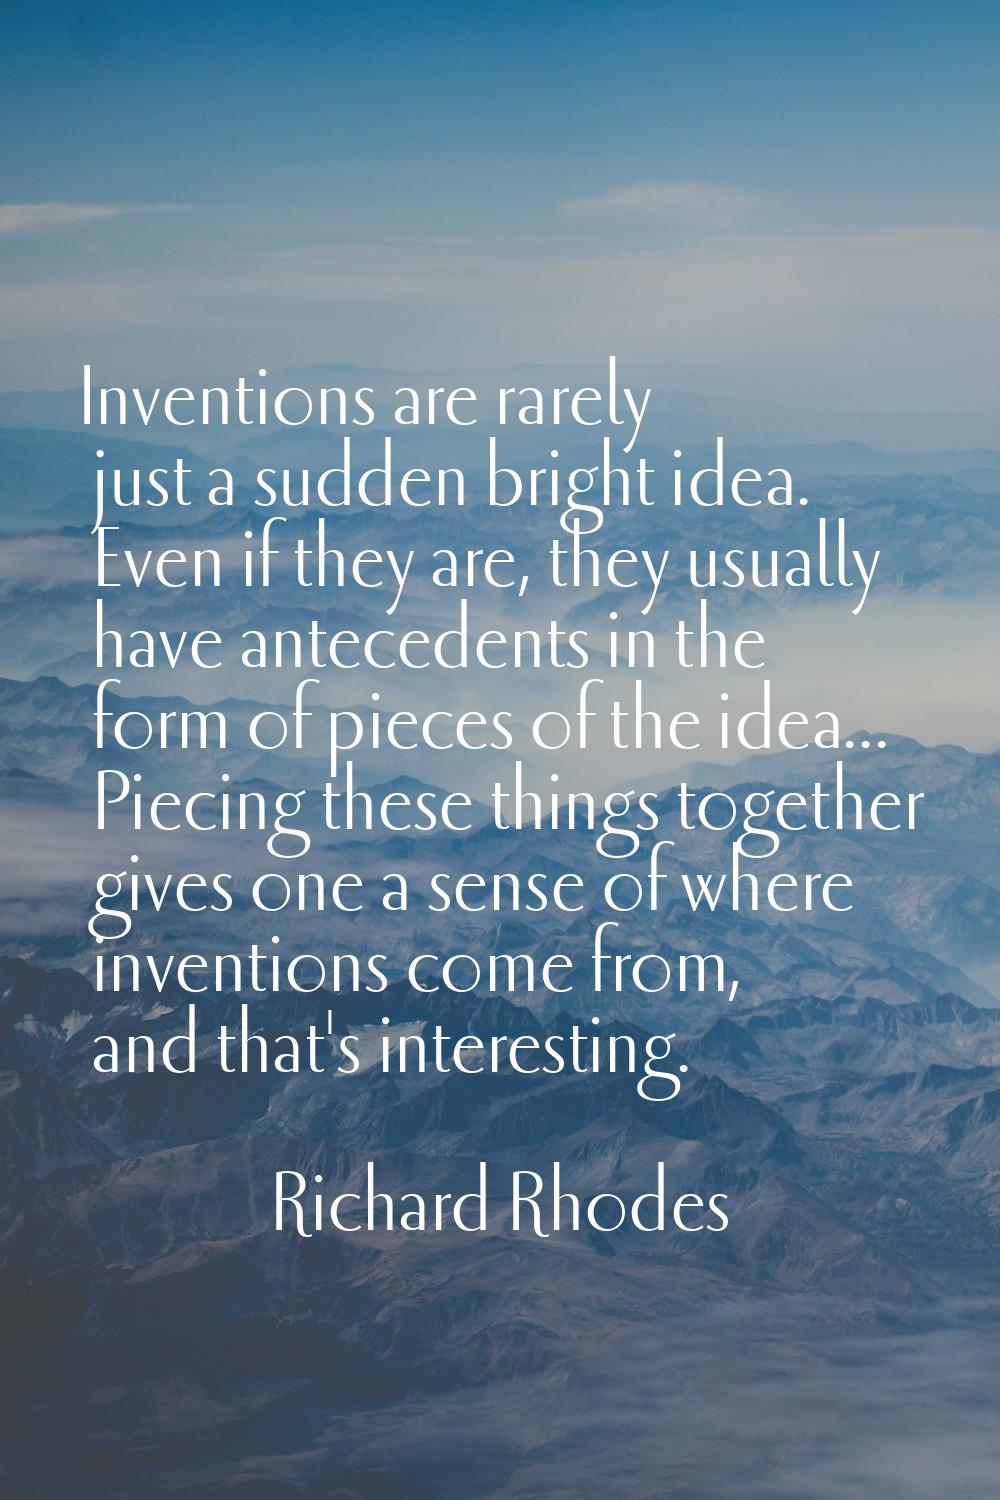 Inventions are rarely just a sudden bright idea. Even if they are, they usually have antecedents in